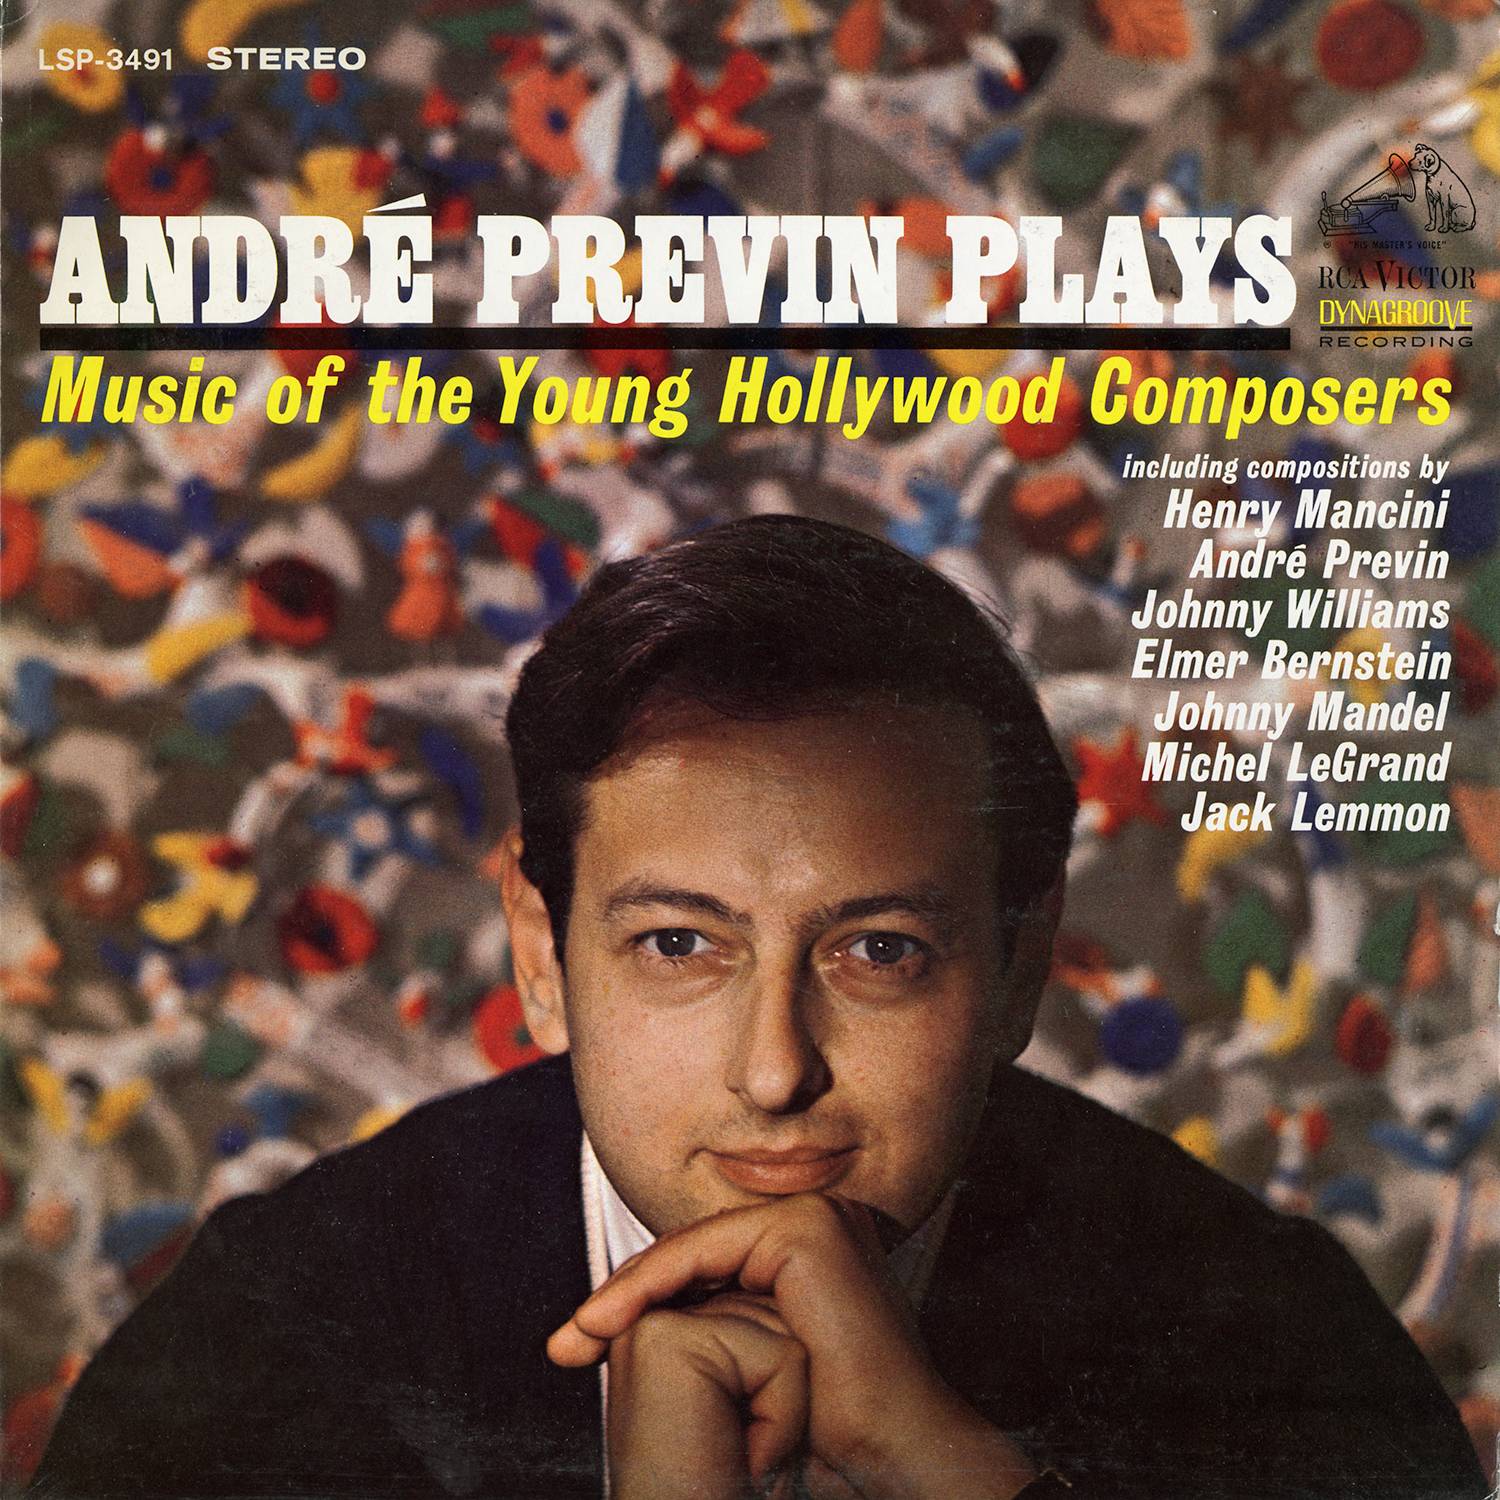 Andre Previn – Music Of The Young Hollywood Composers (1965/2015) [AcousticSounds FLAC 24bit/96kHz]